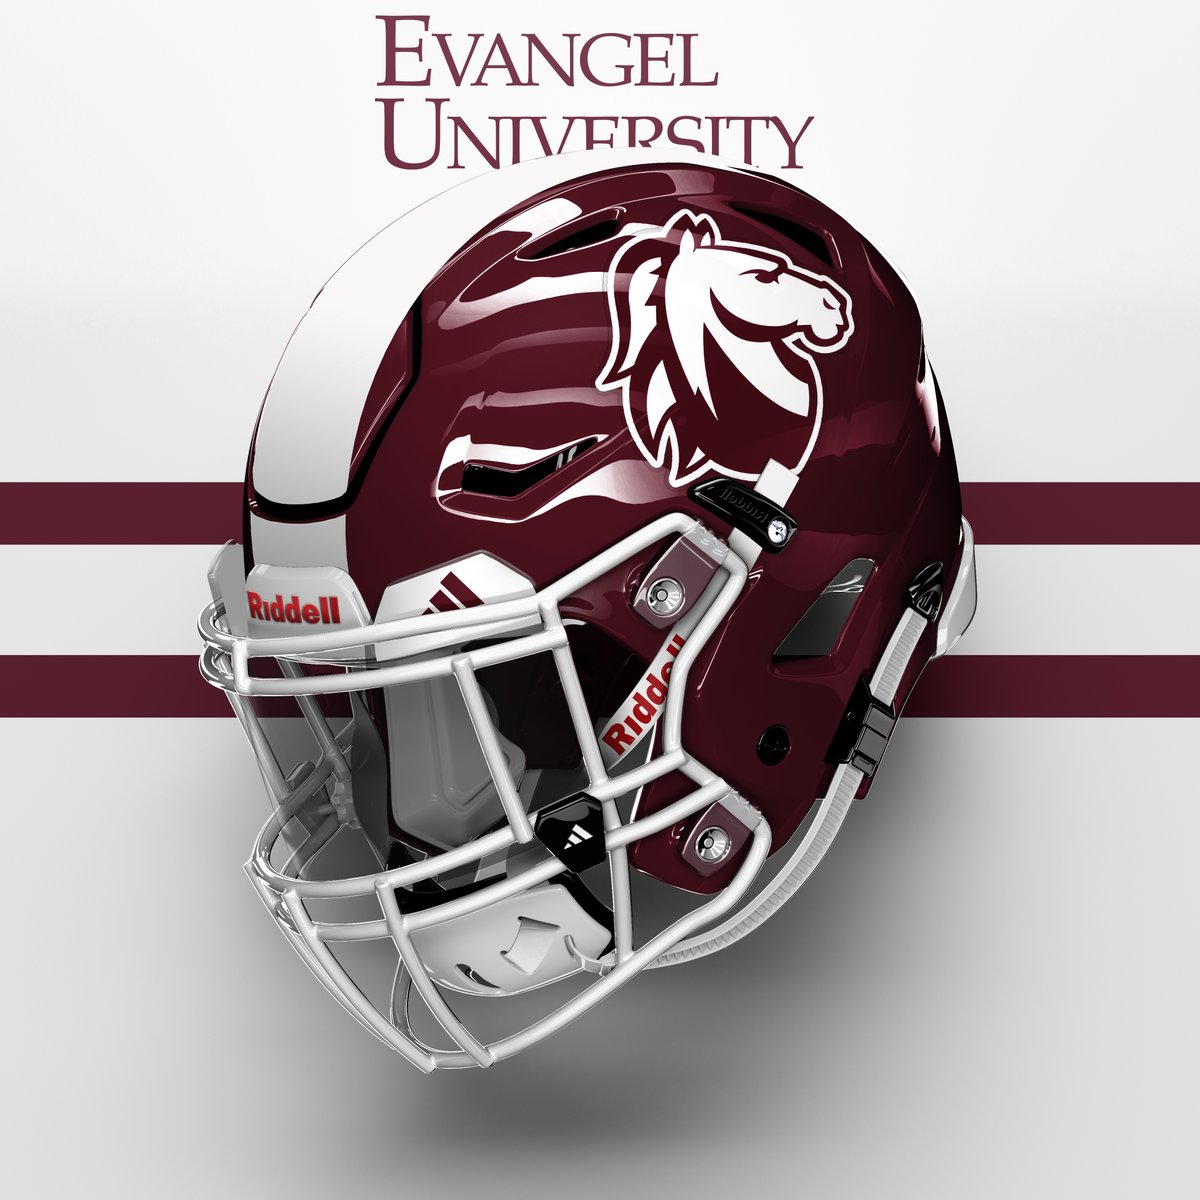 What a season '23 was for the Evangel University Valor! Undefeated regular season, KCAC Champions, and a berth in the NAIA playoffs. #codemaroon #EUfootball